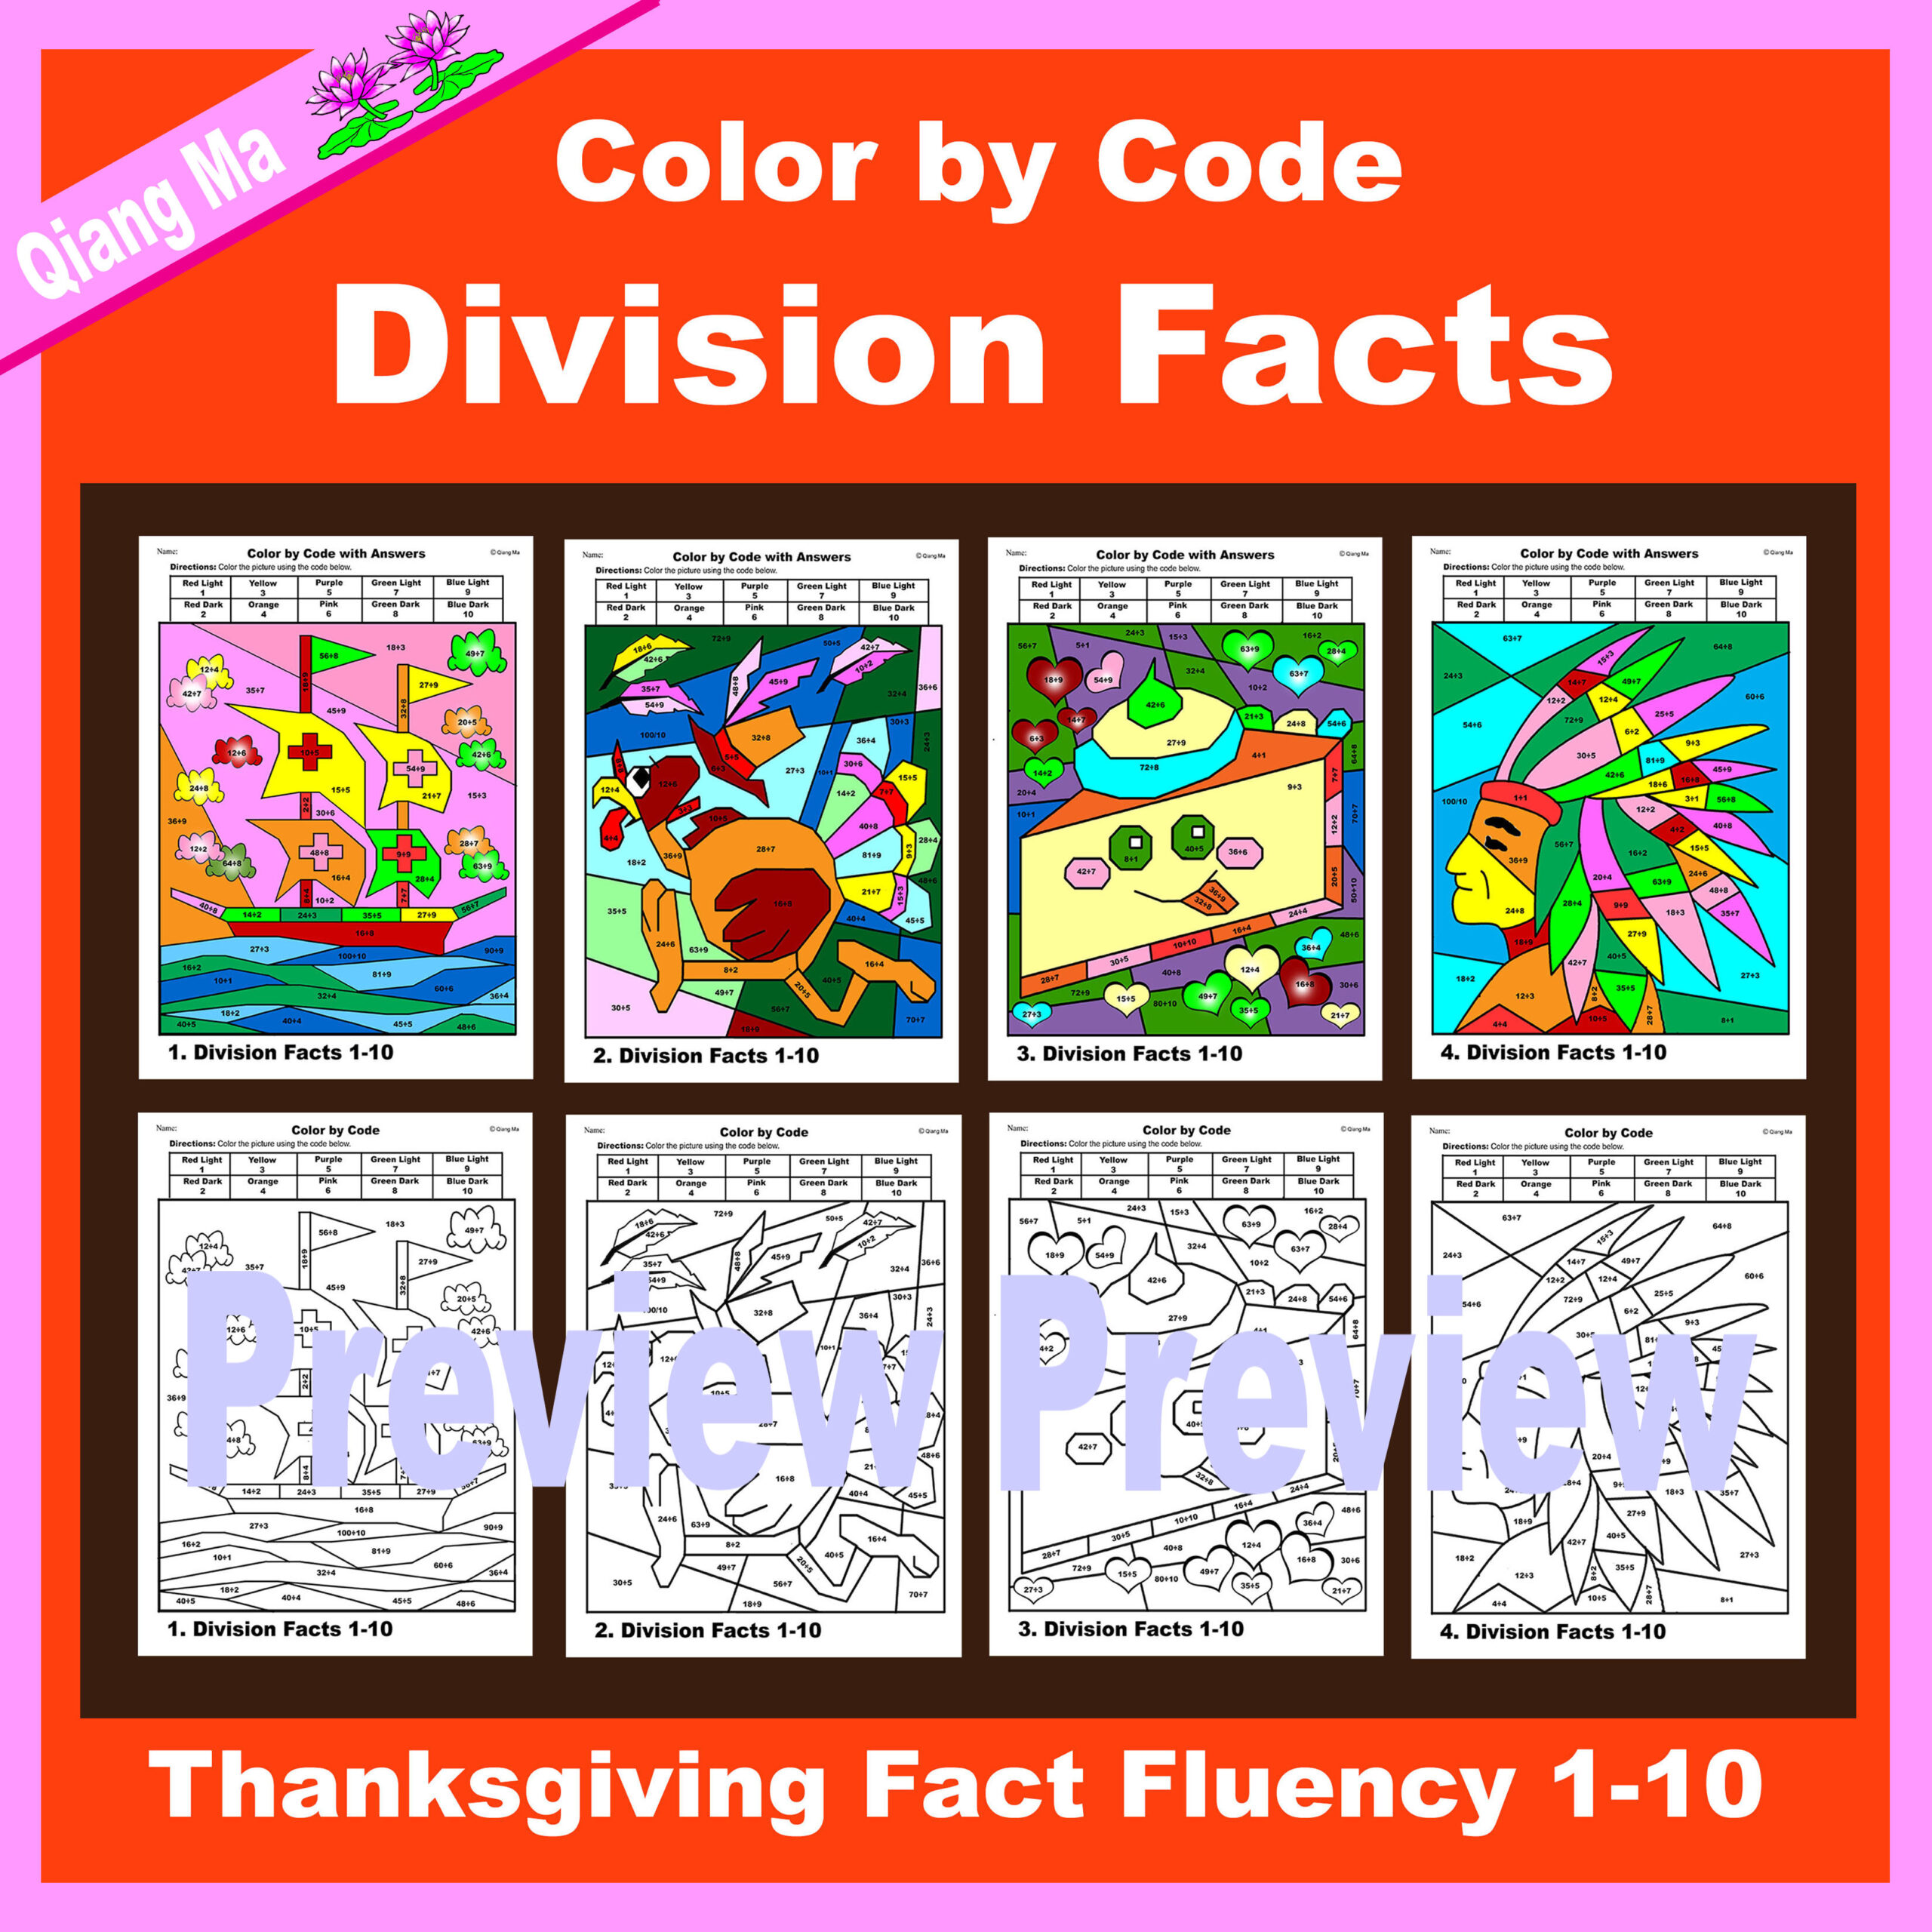 Thanksgiving Color by Code: Division Facts 1-10's featured image